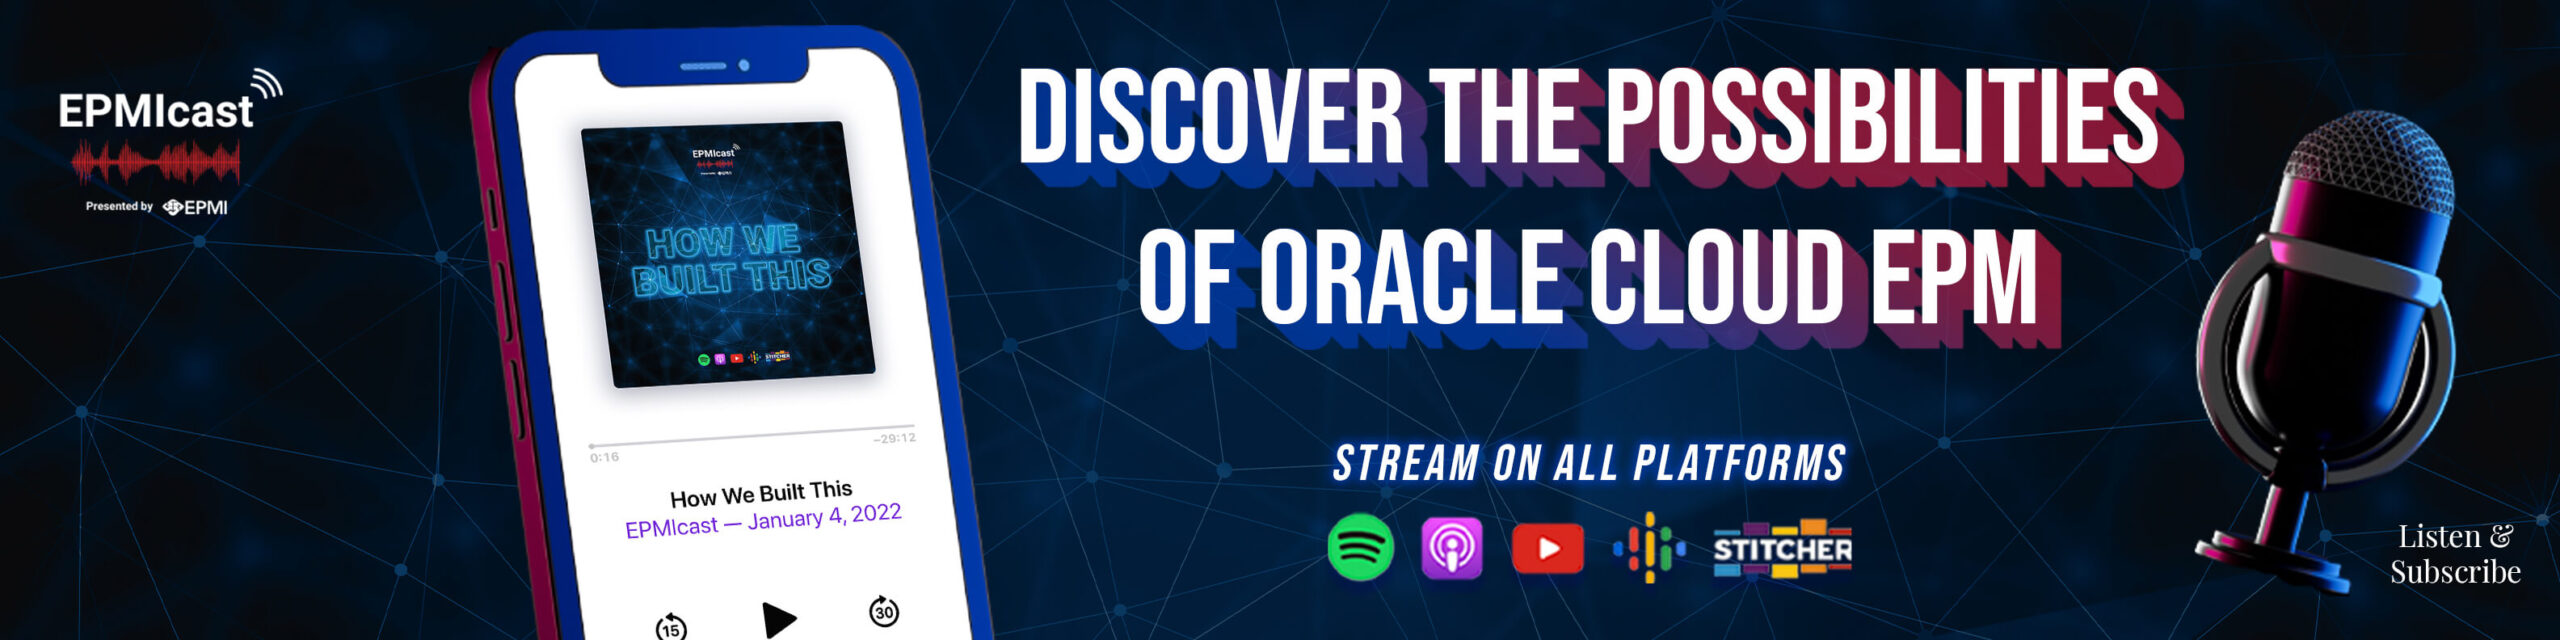 EPMIcast- Discover the Possibilities of Oracle Cloud EPM